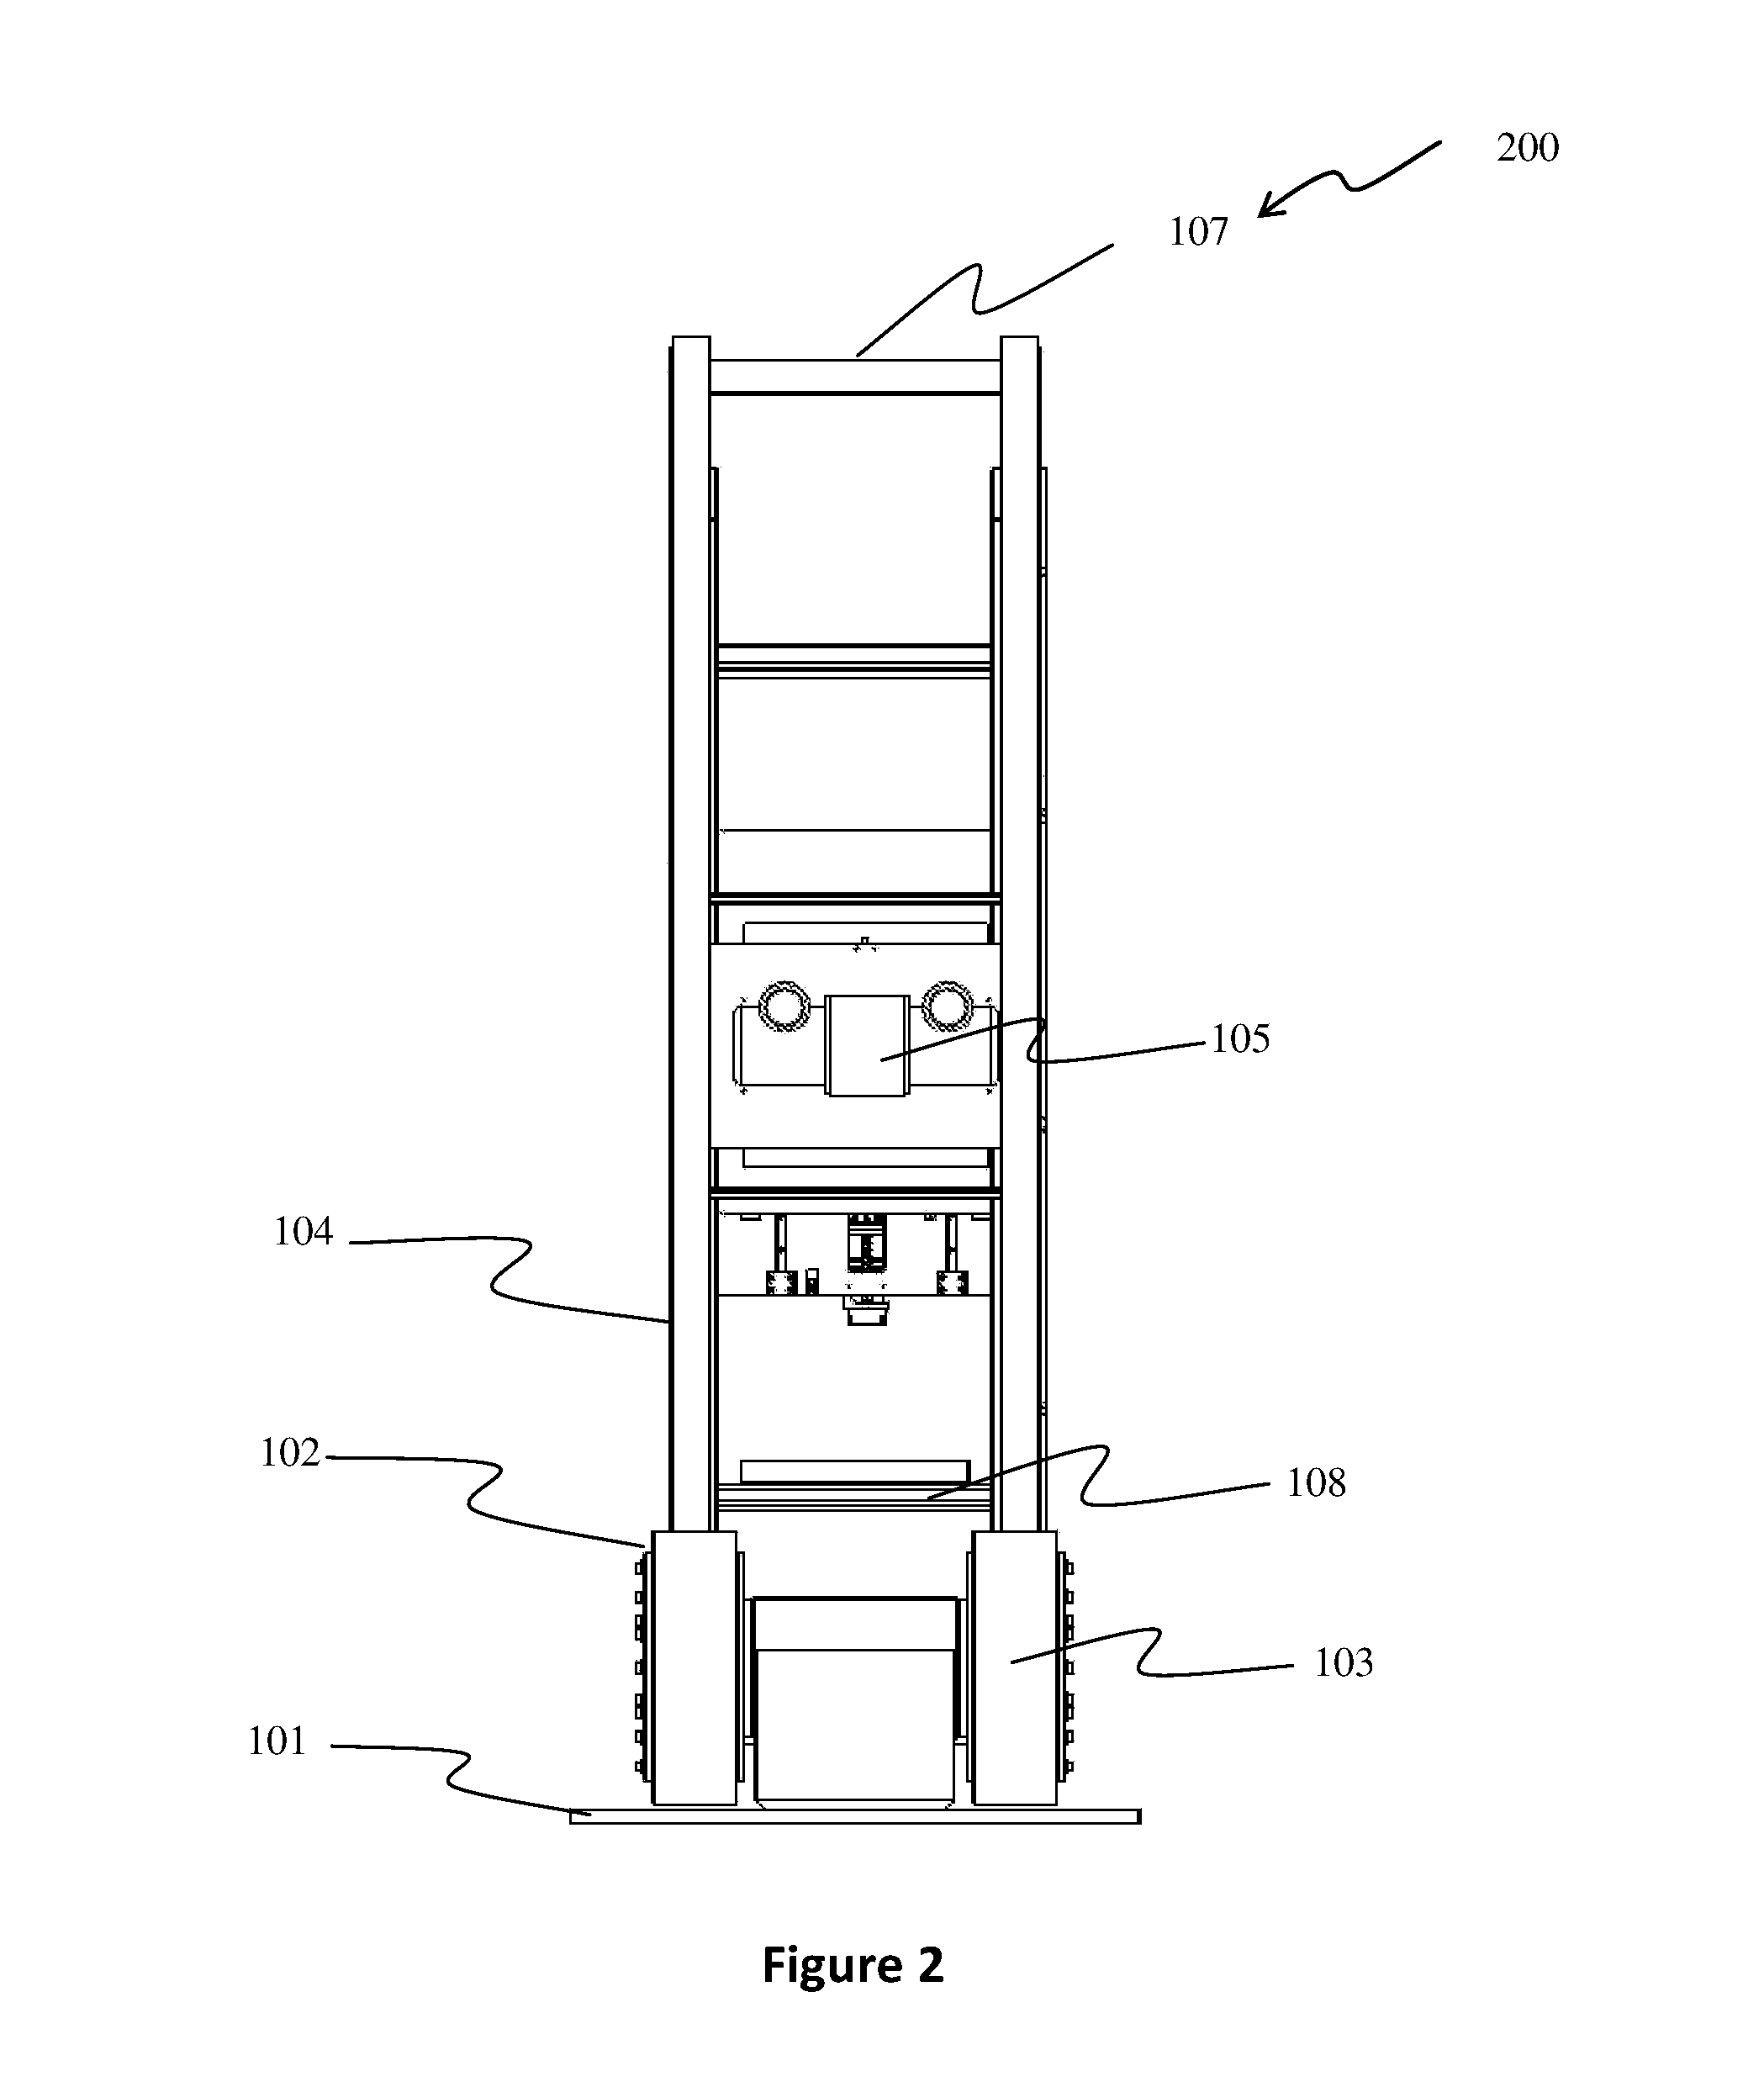 An apparatus to deliver conformal radiotherapy using external beam cobalt 60